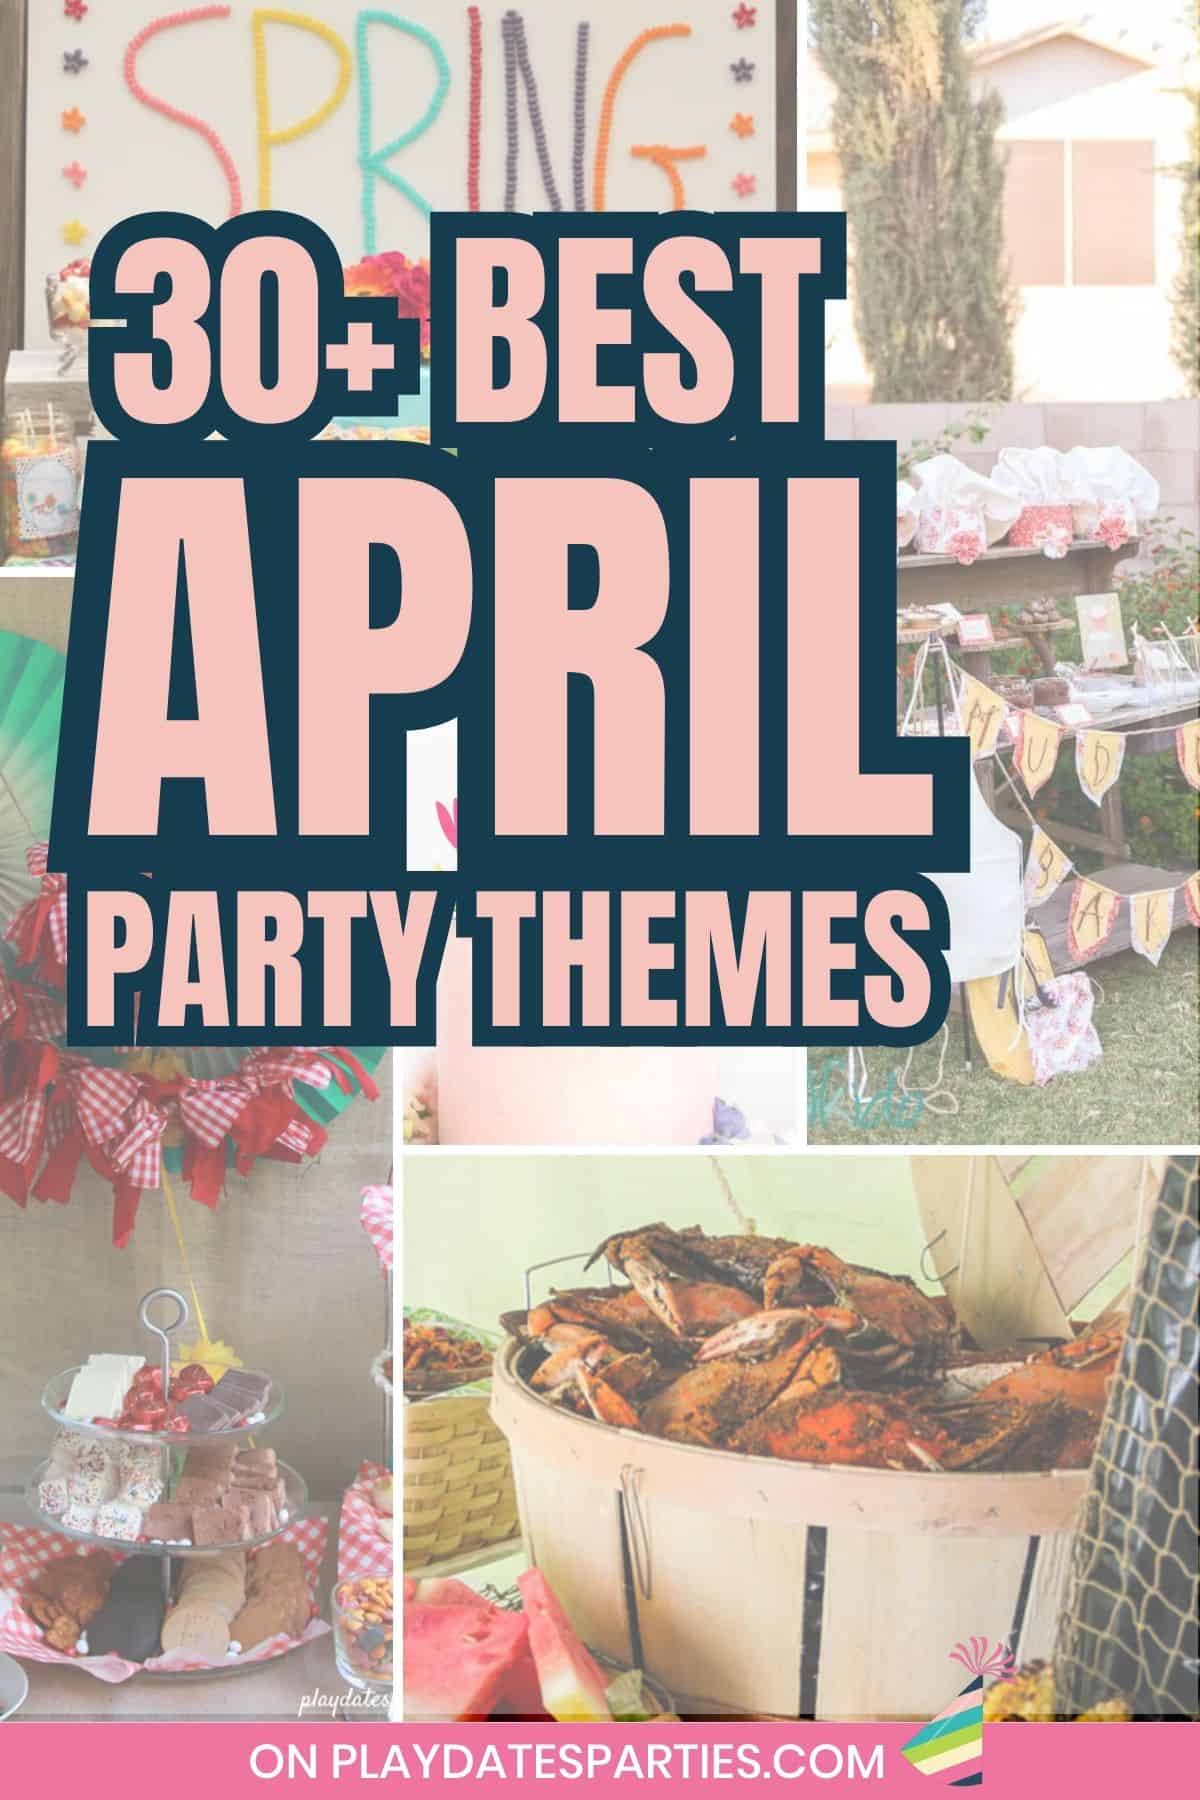 Collage of parties with text overlay 30+ best April party themes.